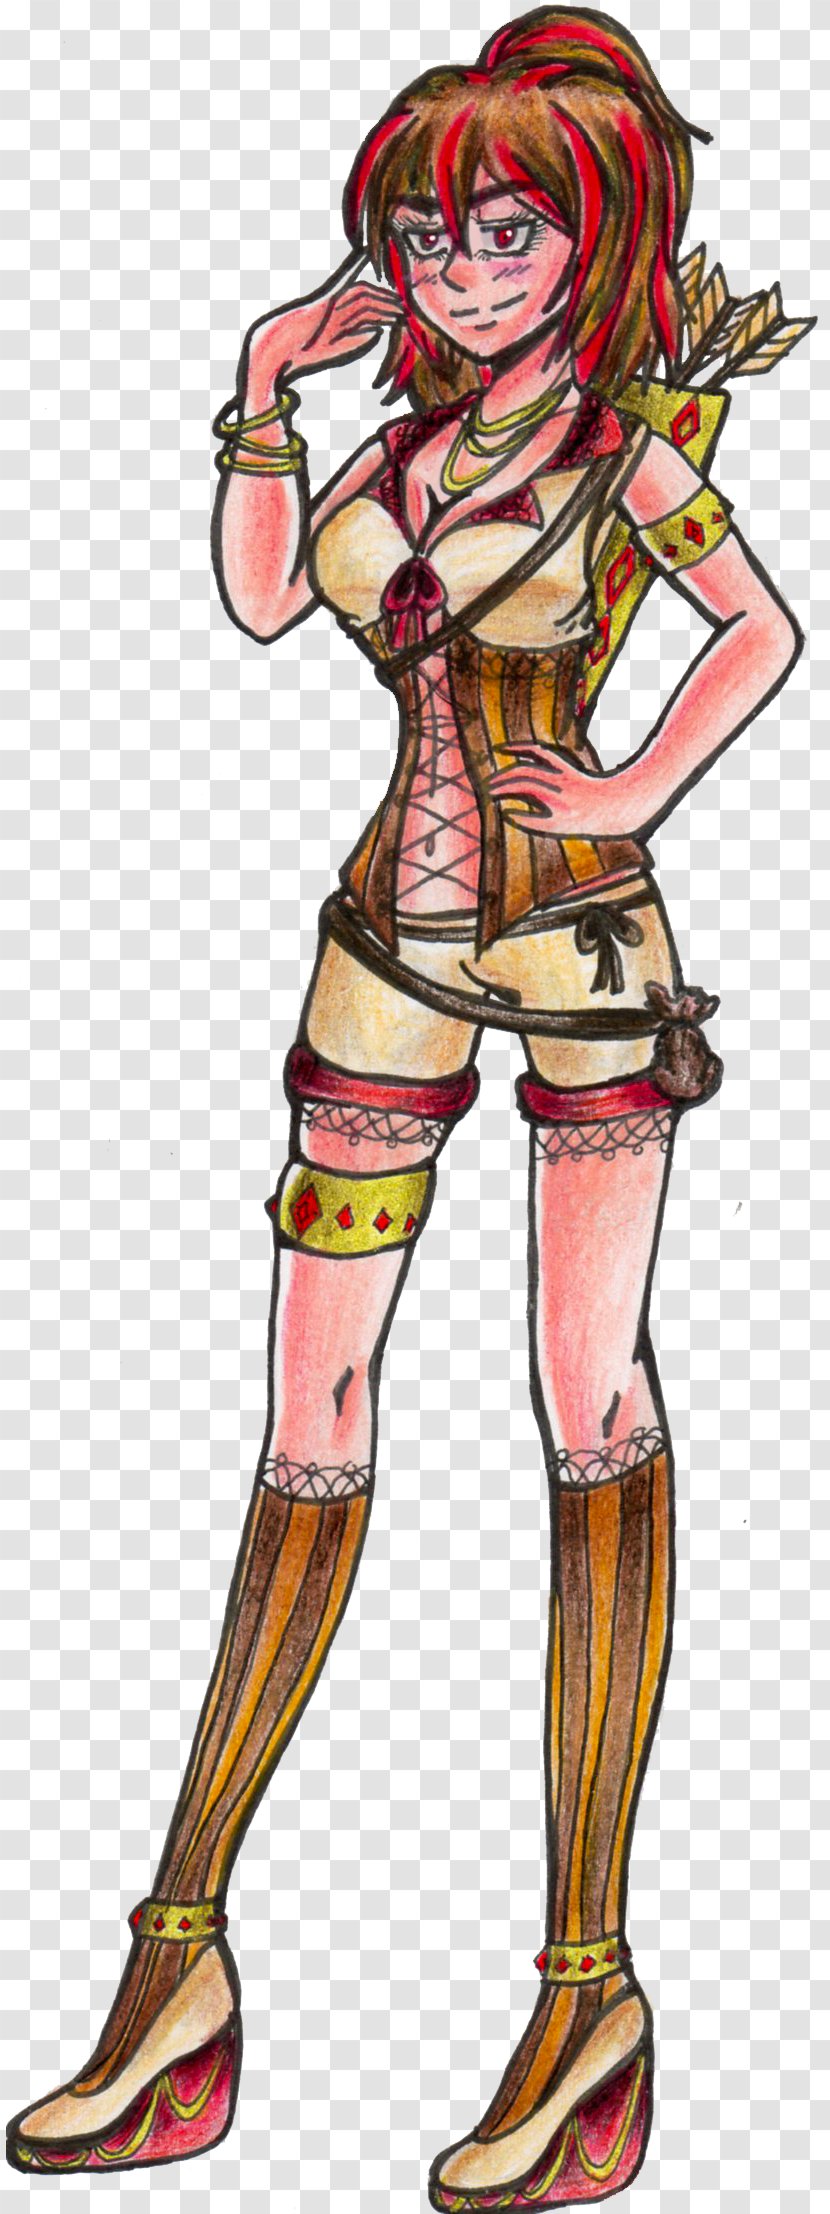 Drawing Steampunk Clothing Fiction - Cartoon - Fashion Accessories Transparent PNG